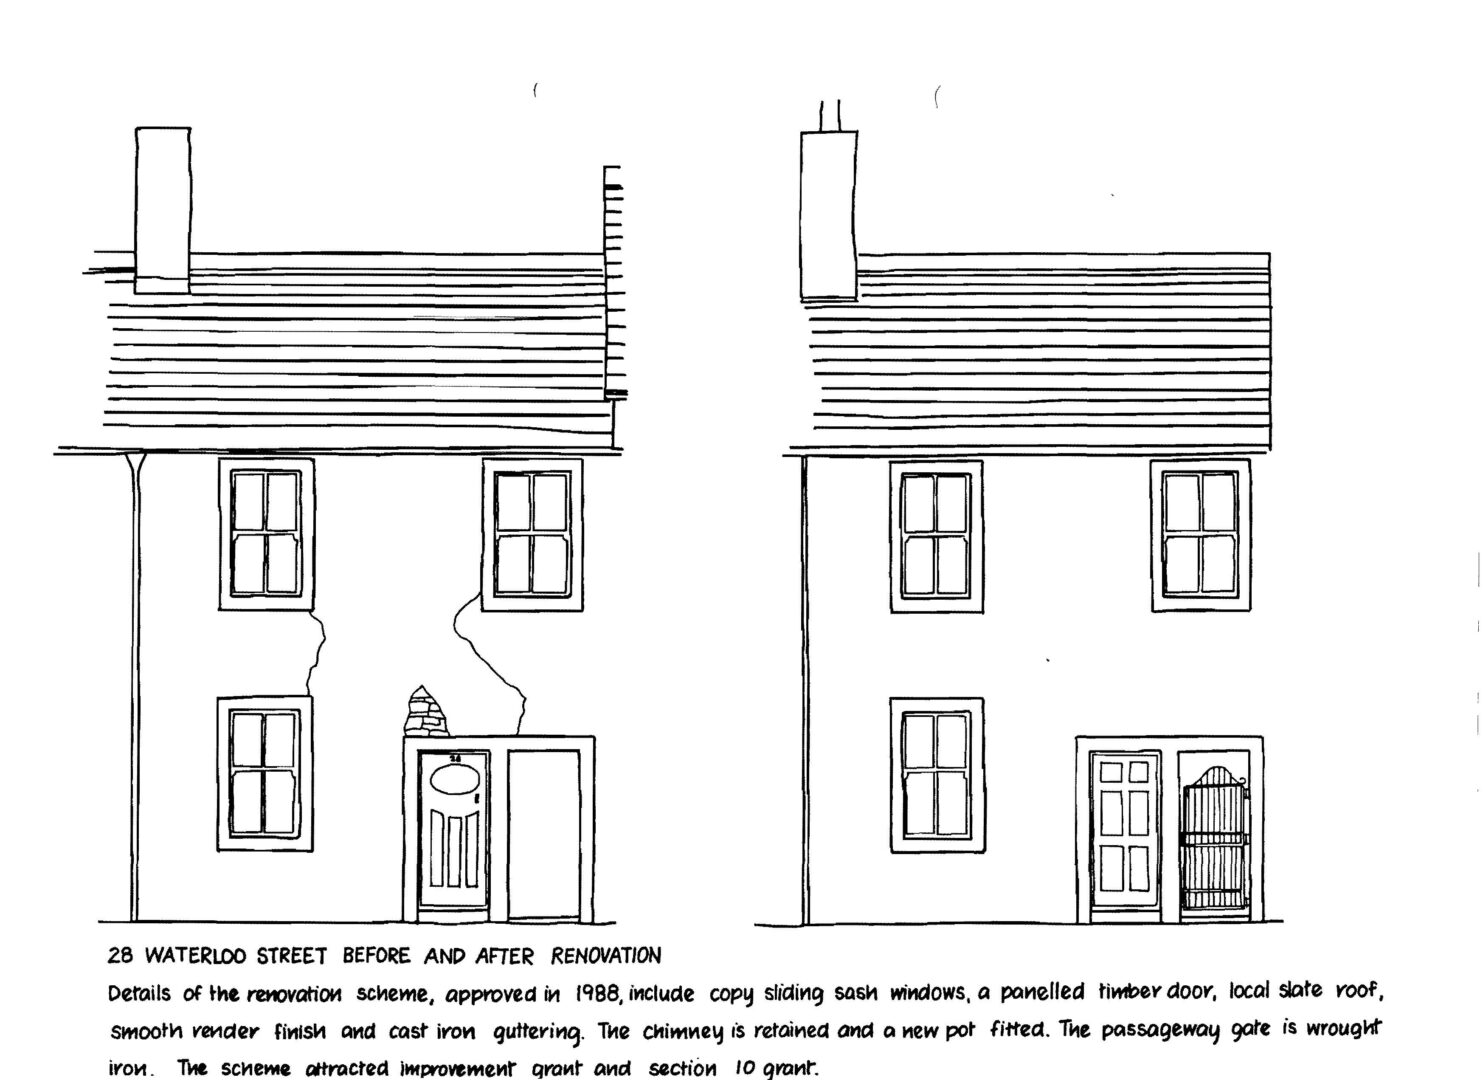 Waterloo Street 28 conservation report page July 1989 before and after renovation drawing scaled